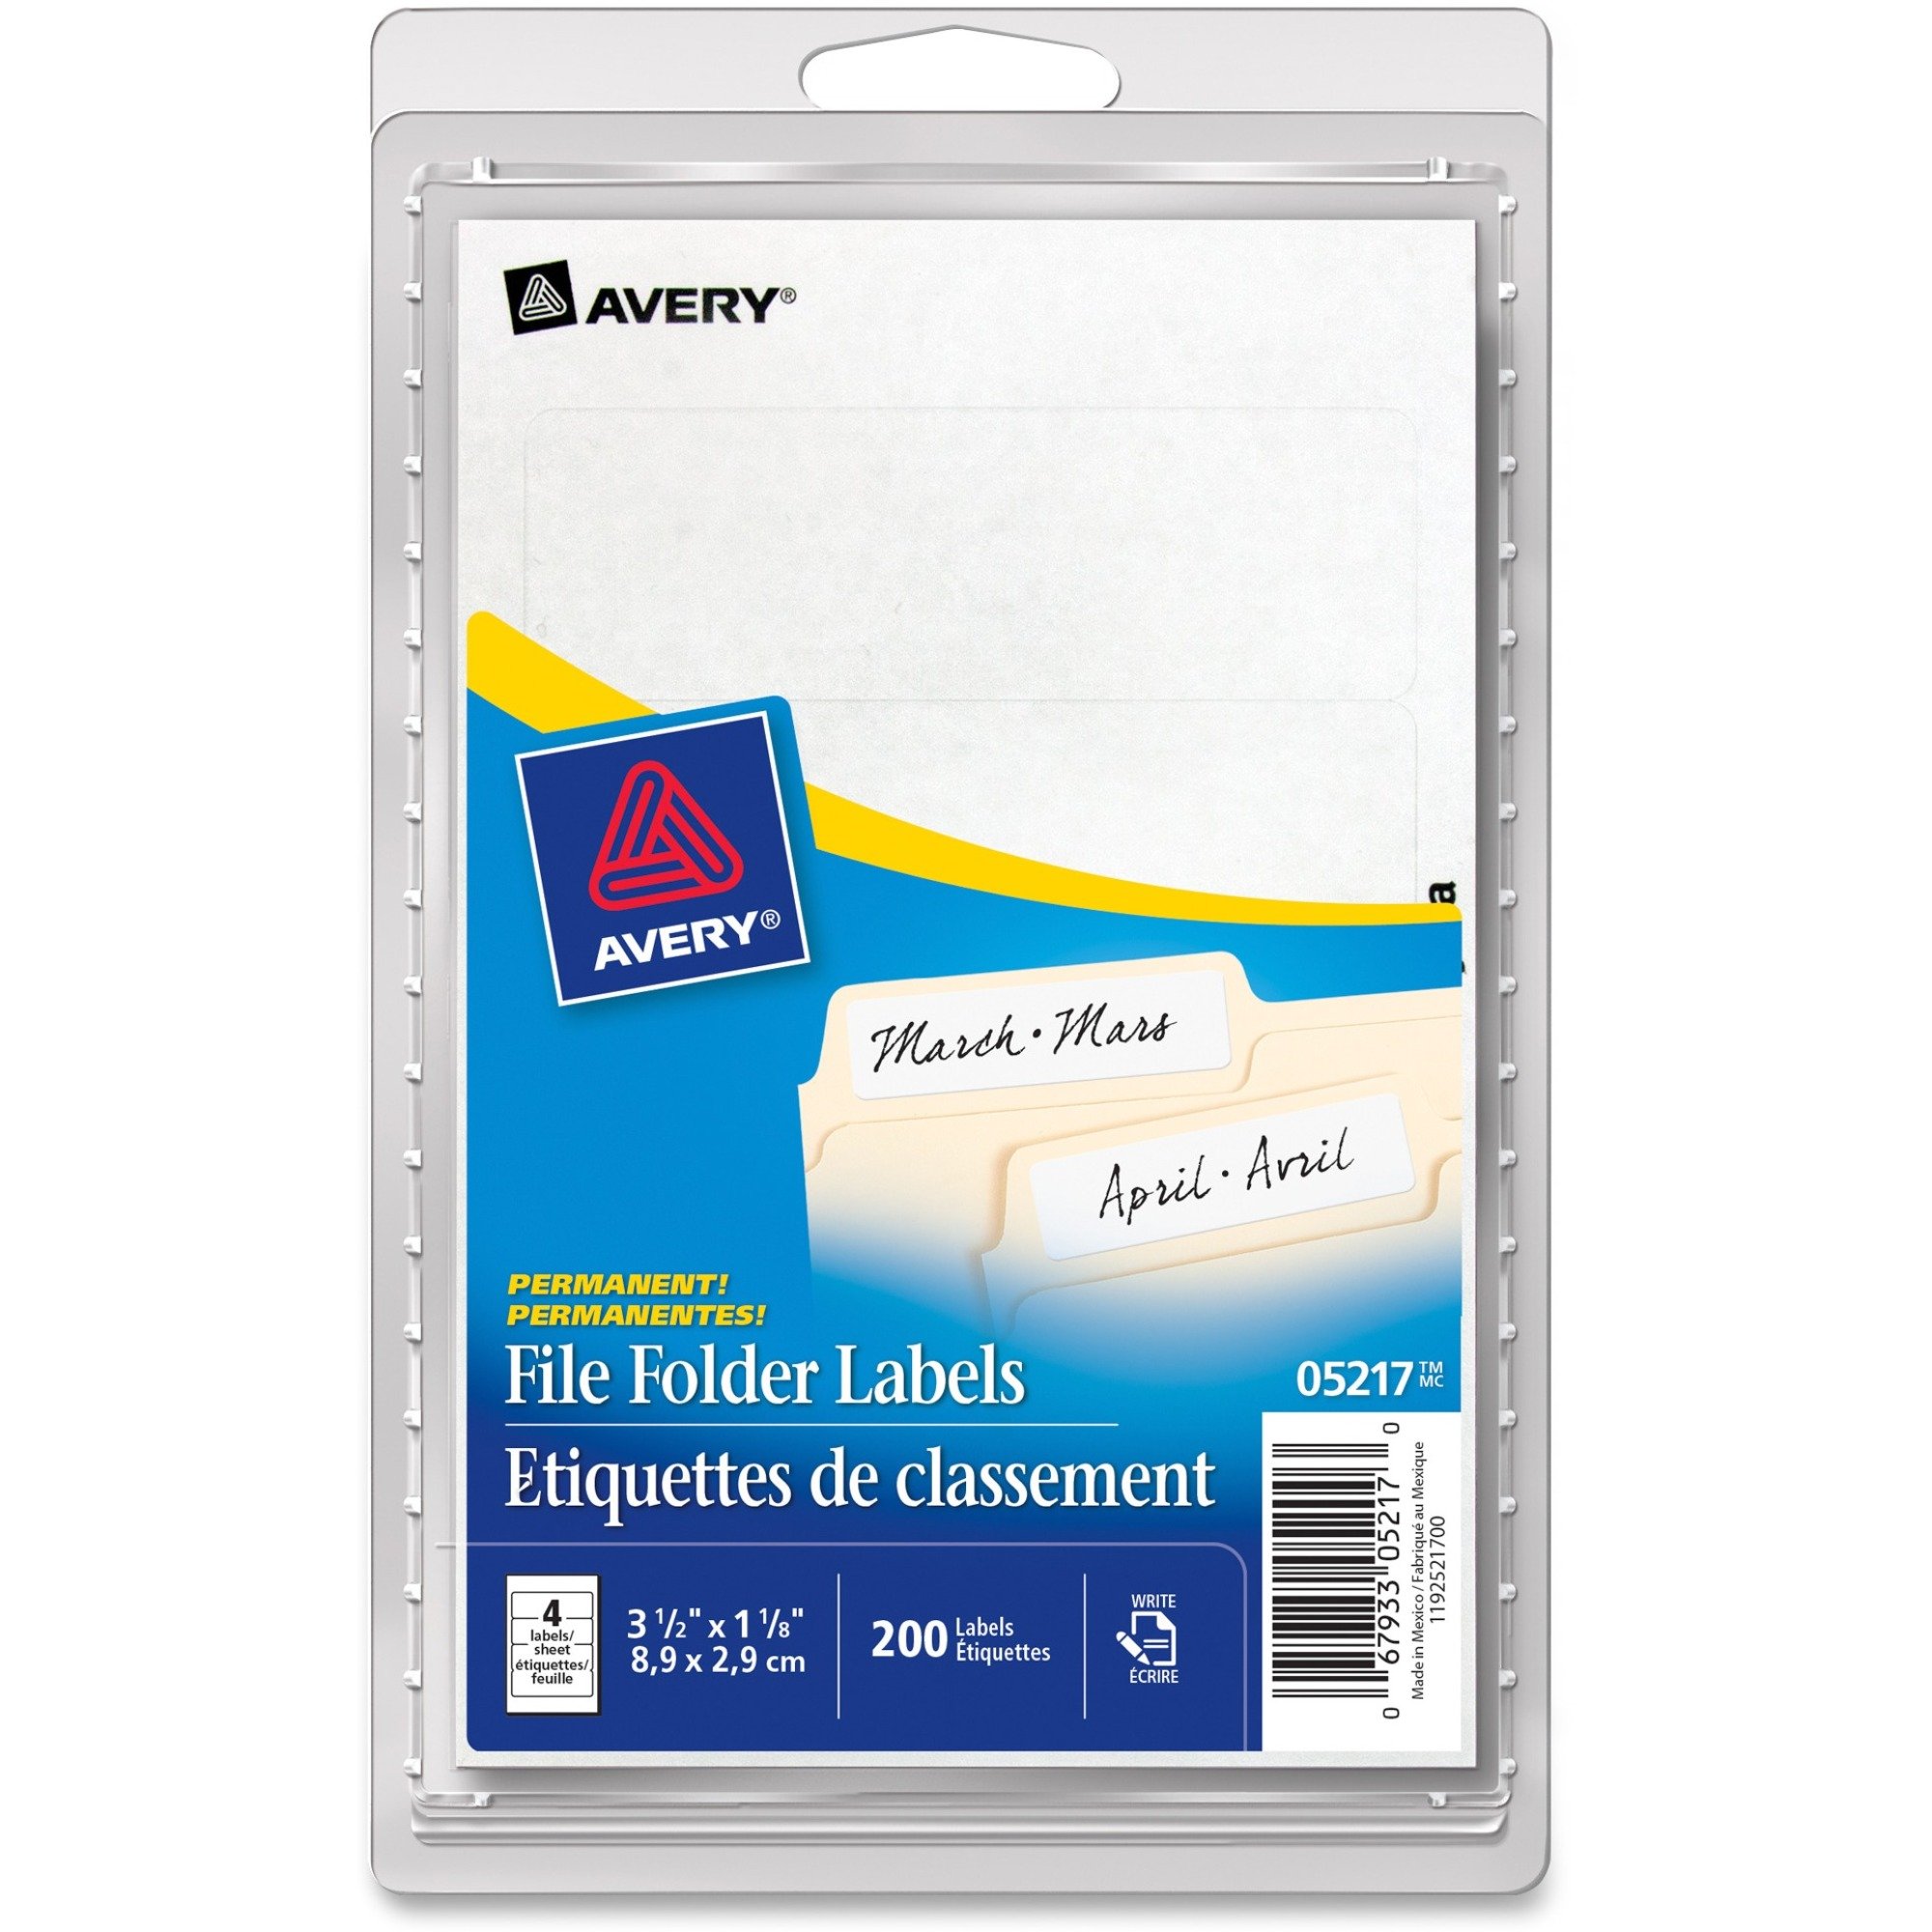 Avery® Permanent Adhesive File Folder Labels 3 1/2'' Width x 1 1/8'' Length - 200/Pack